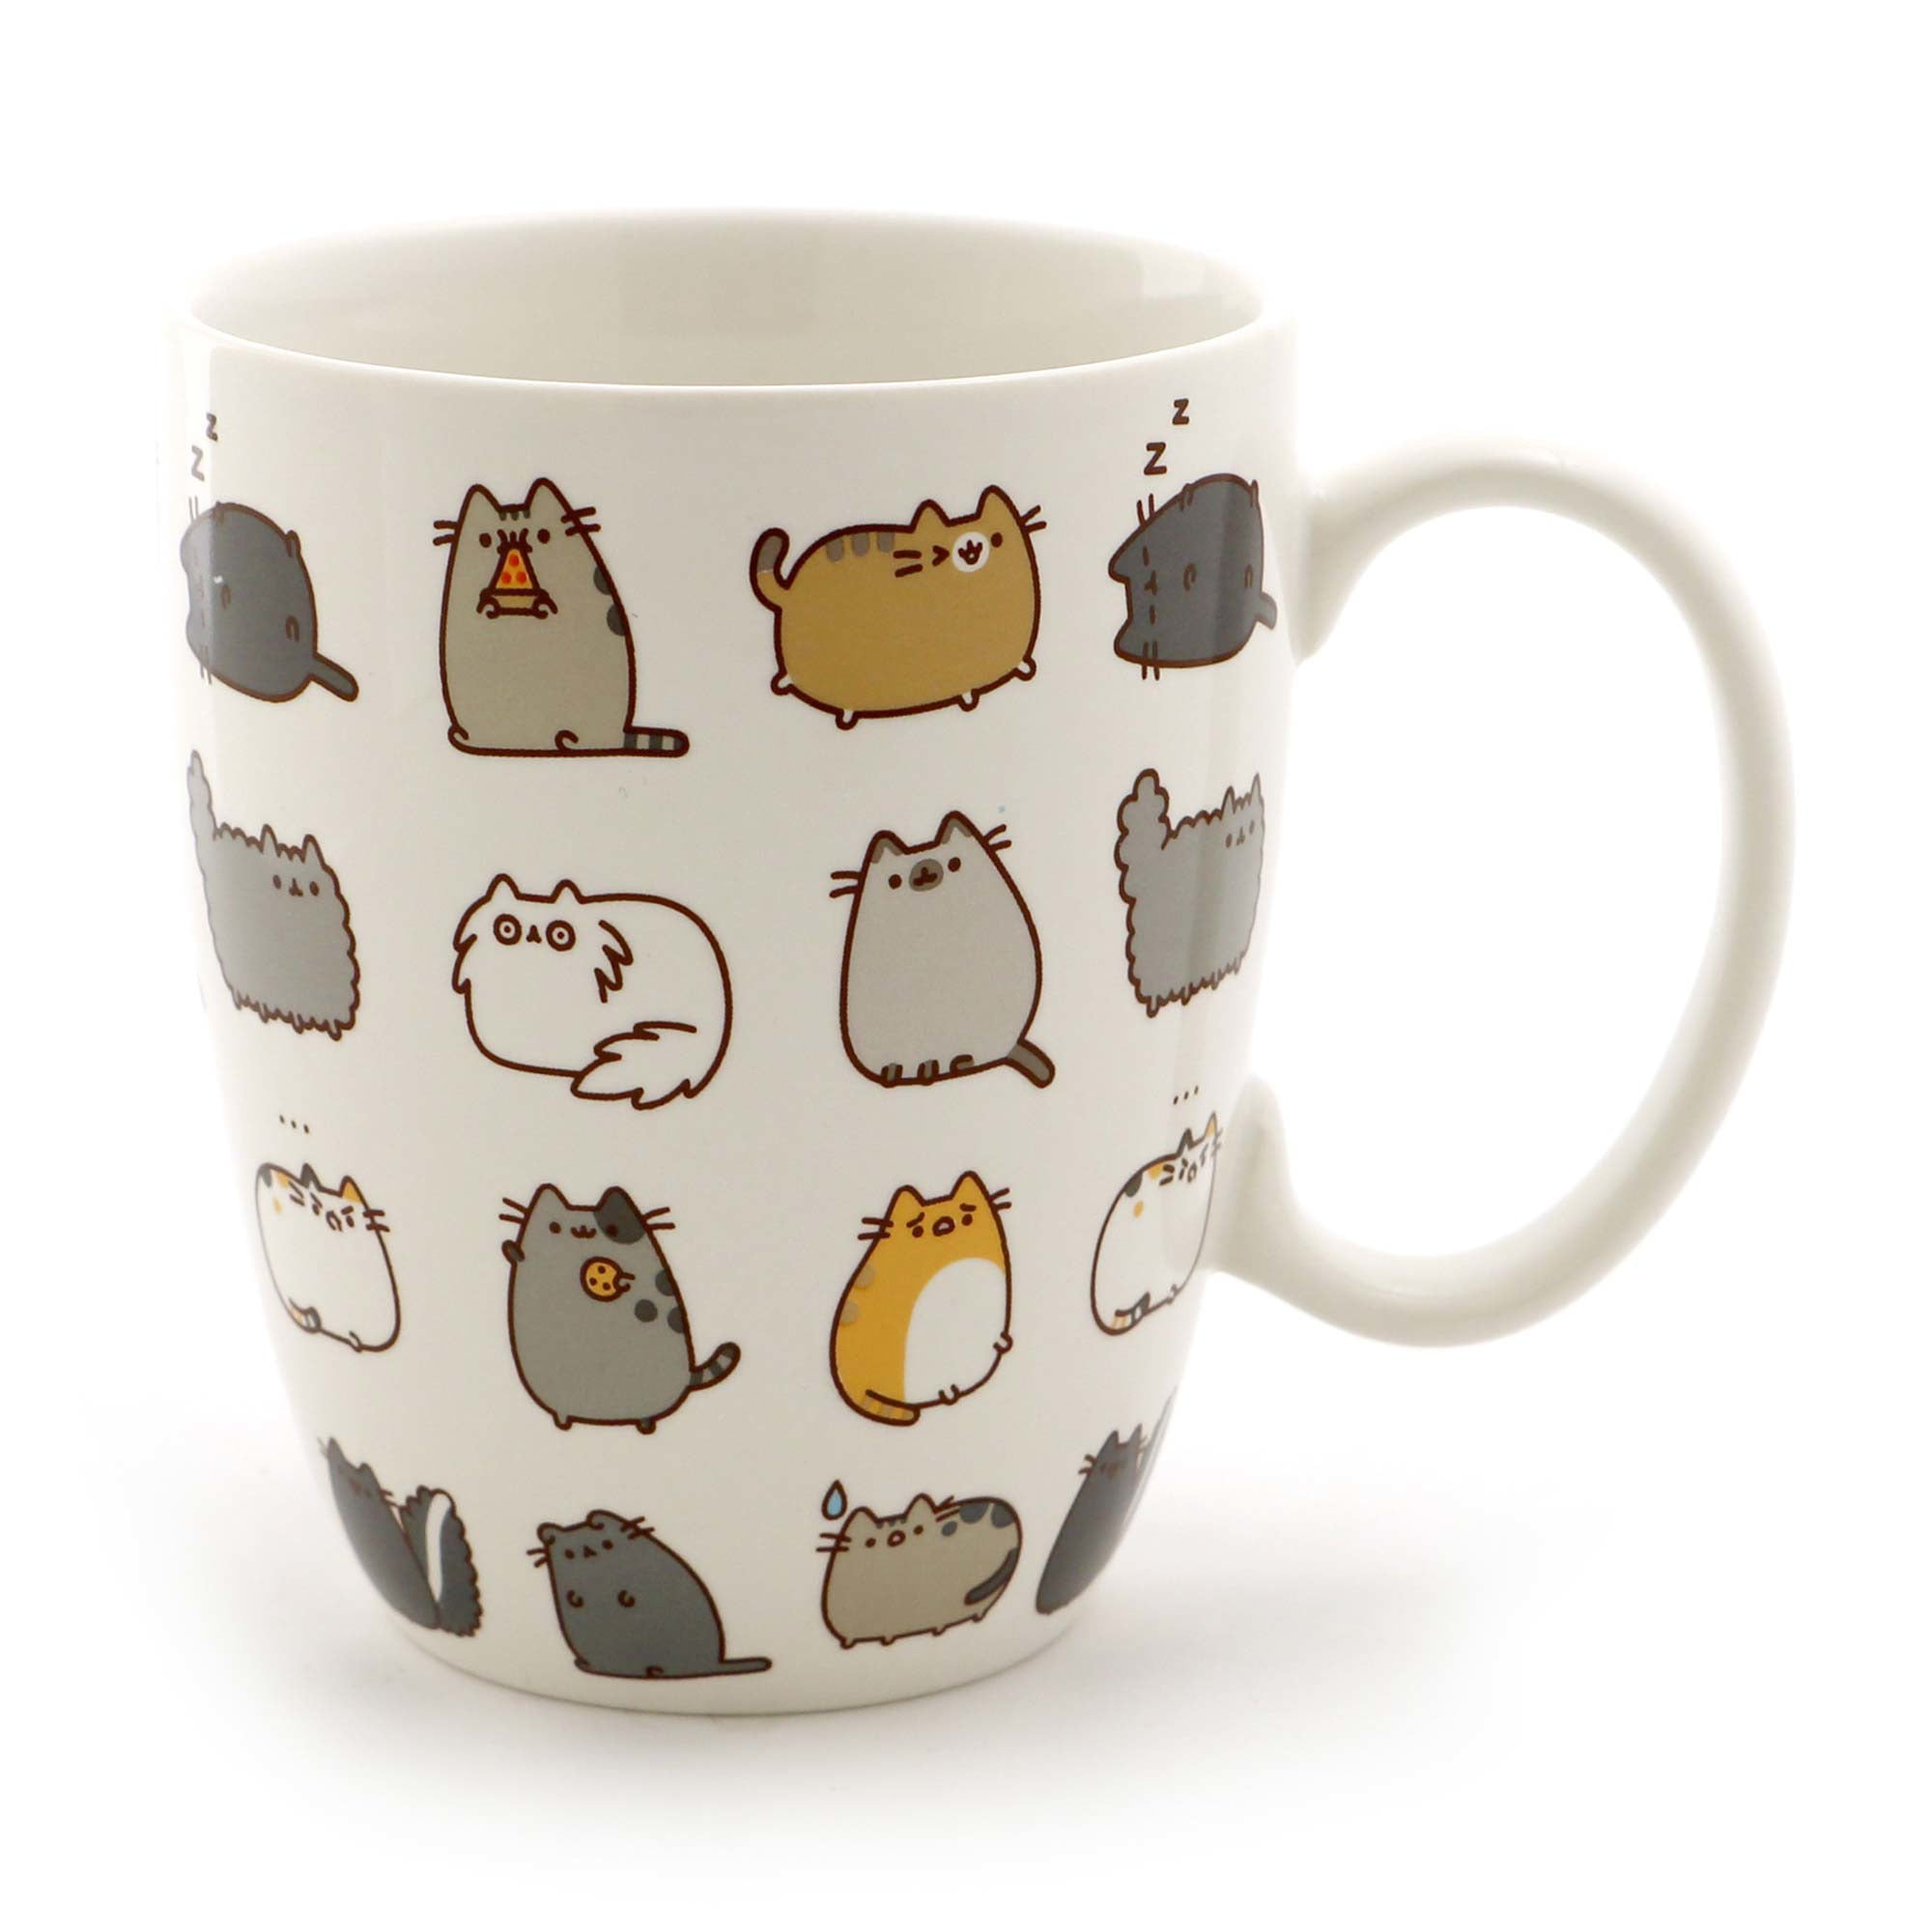 Our Name is Mud 6004626 Pusheen the Cat with Stormy Dotty Mug Set 